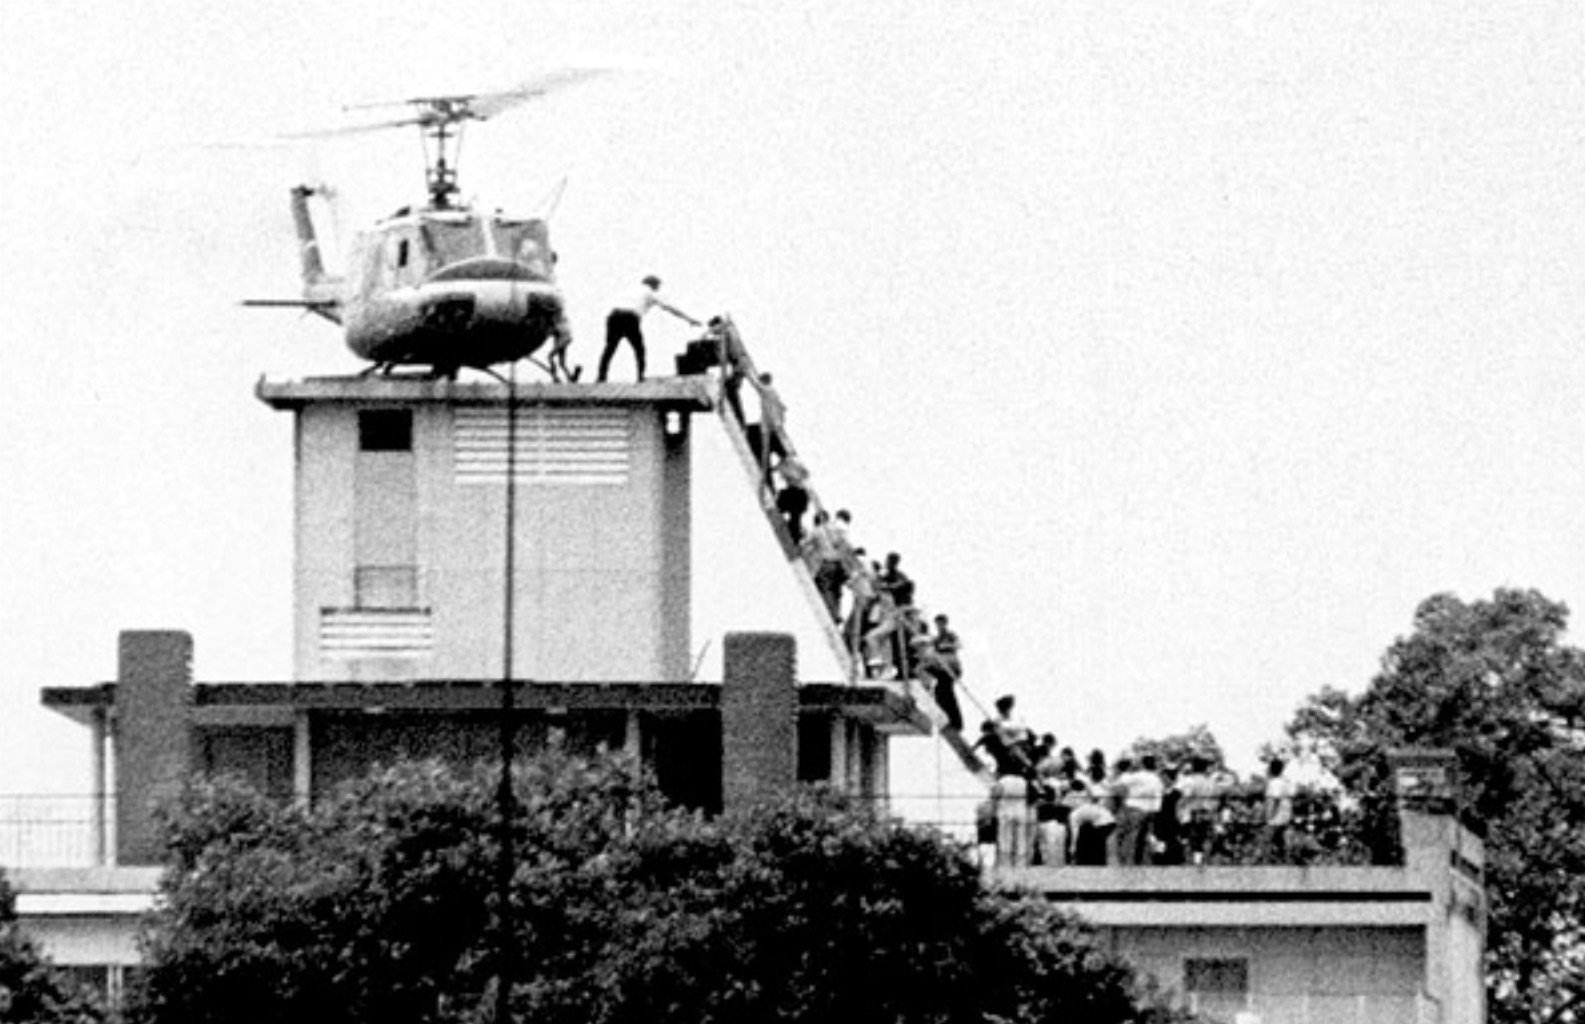 On August 29, 1975, Dutch photojournalist Hubert Van Es captured the historic photograph showing a helicopter evacuating people from a rooftop during the Fall of Saigon. Initial reports misidentified the rooftop as the US Embassy.